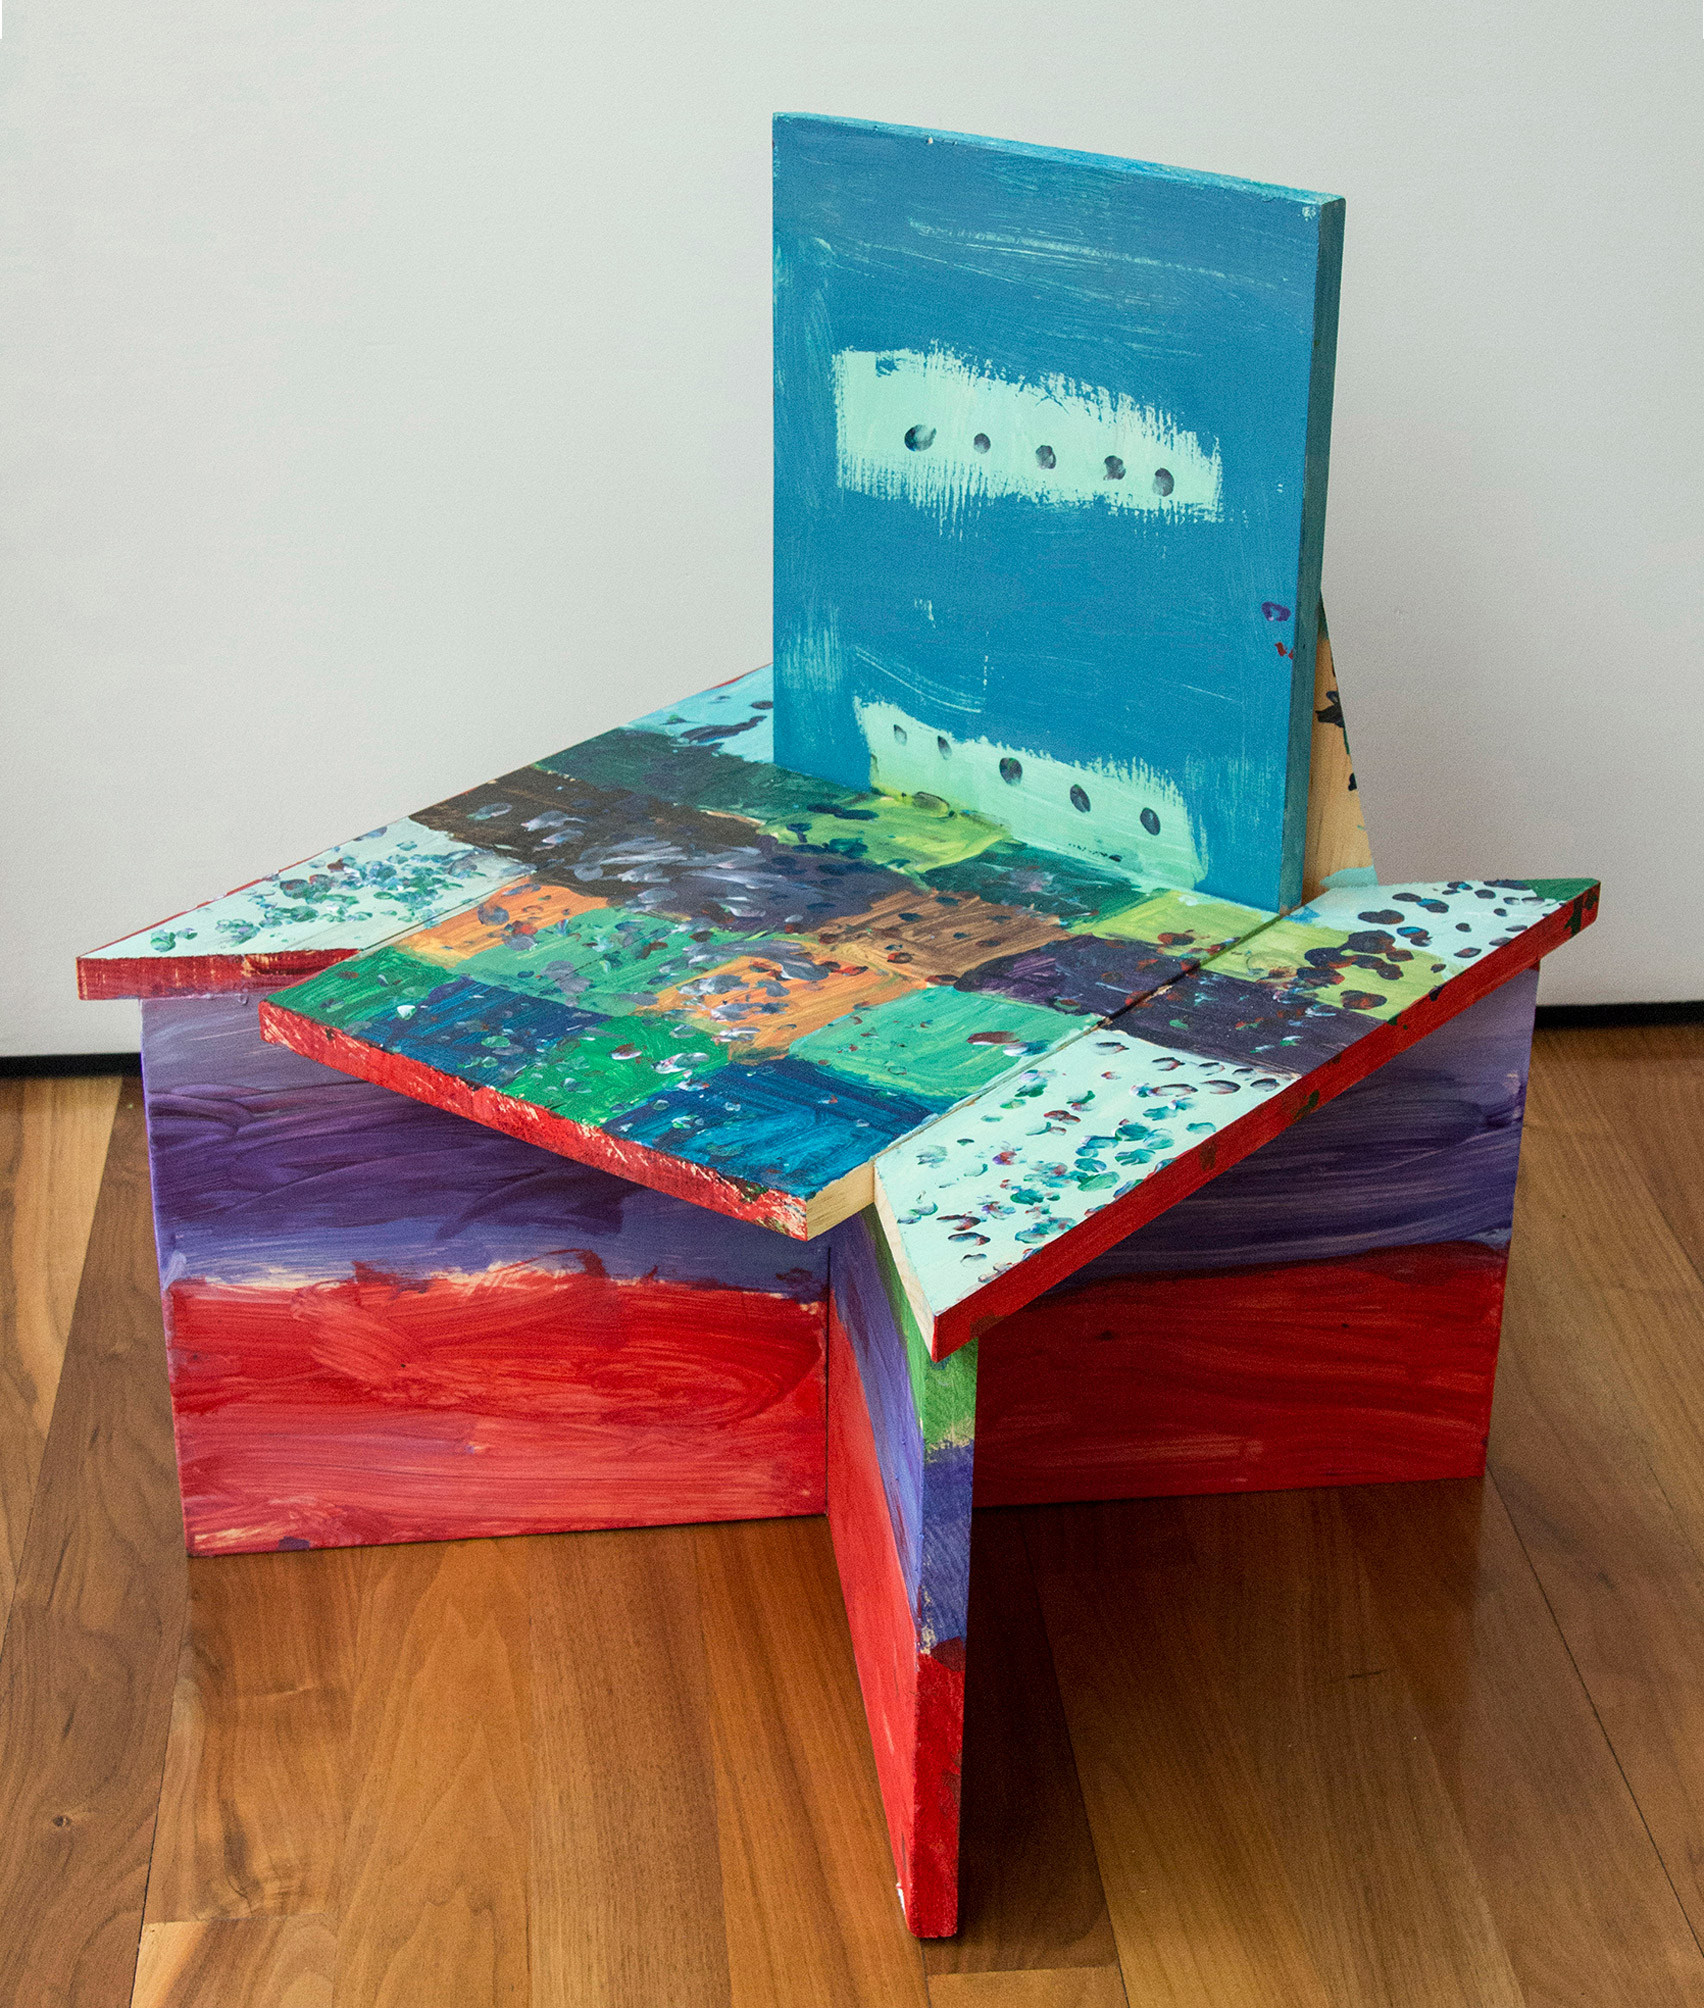 Colourful seating design from Bruce Edelstein's workshop at Trinity School